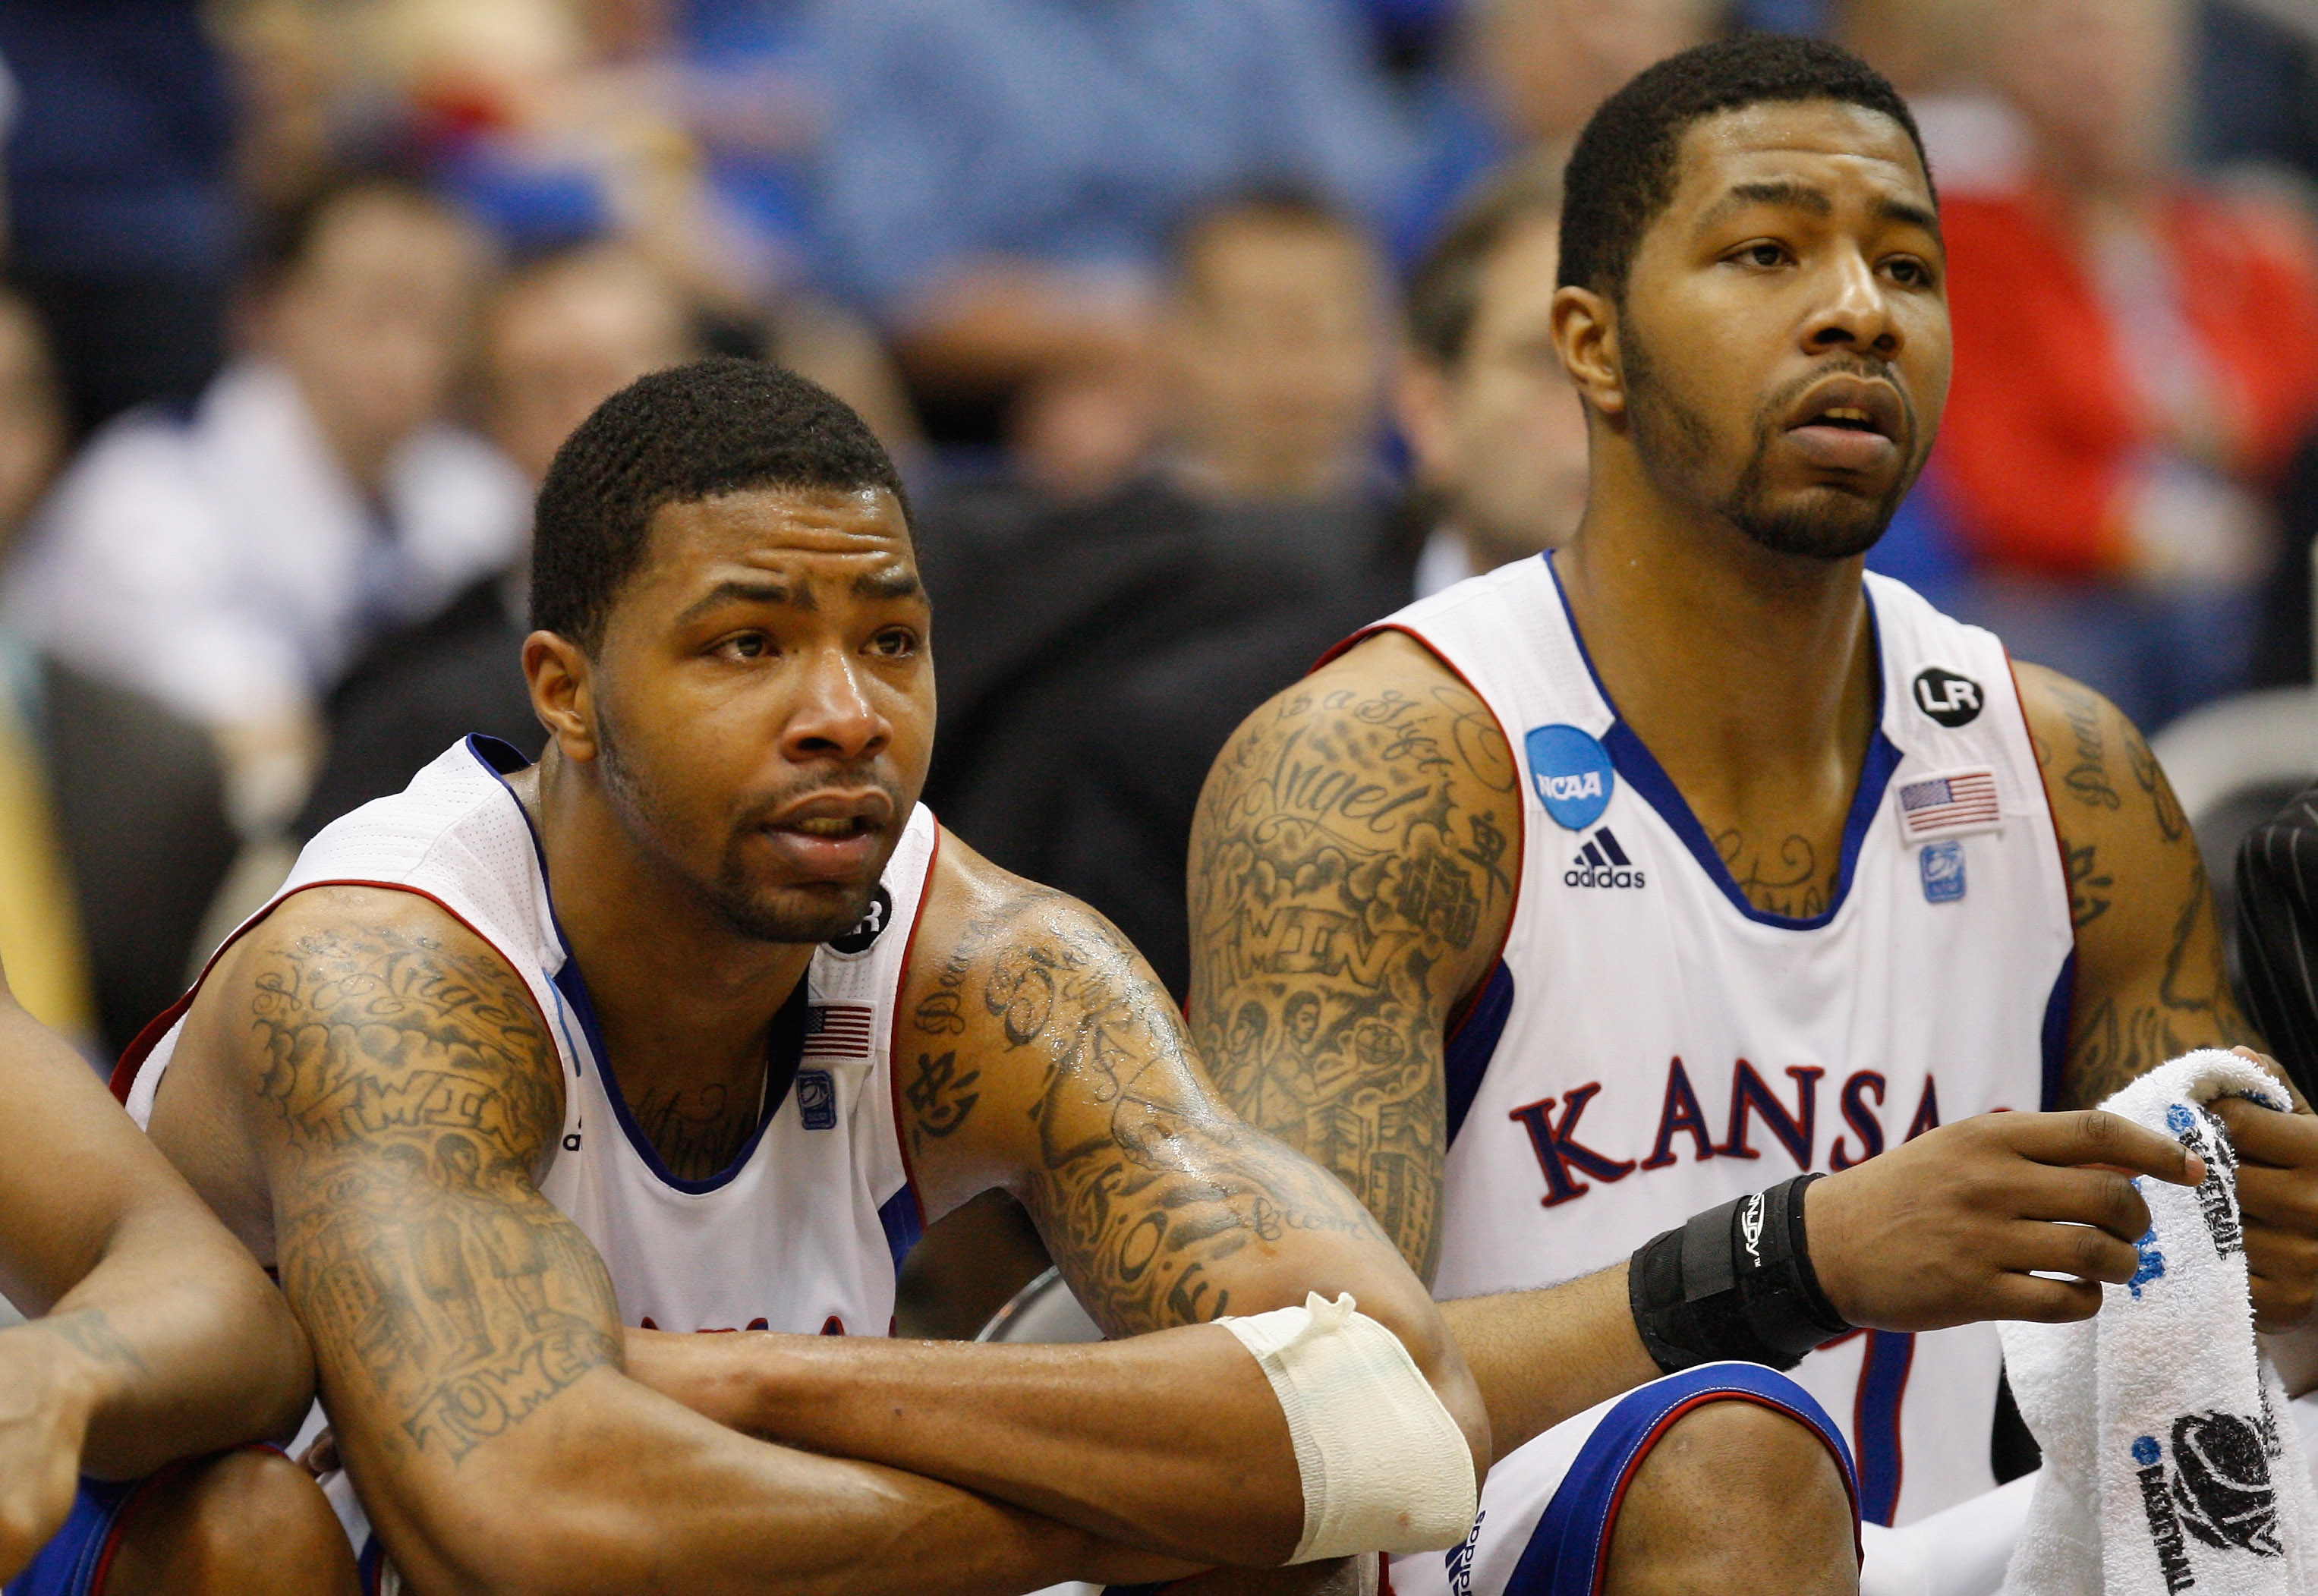 SAN ANTONIO, TX - MARCH 27:  Marcus Morris #22 and Markieff Morris #21 of the Kansas Jayhawks react during the southwest regional final of the 2011 NCAA men's basketball tournament at the Alamodome on March 27, 2011 in San Antonio, Texas. Virginia Commonw